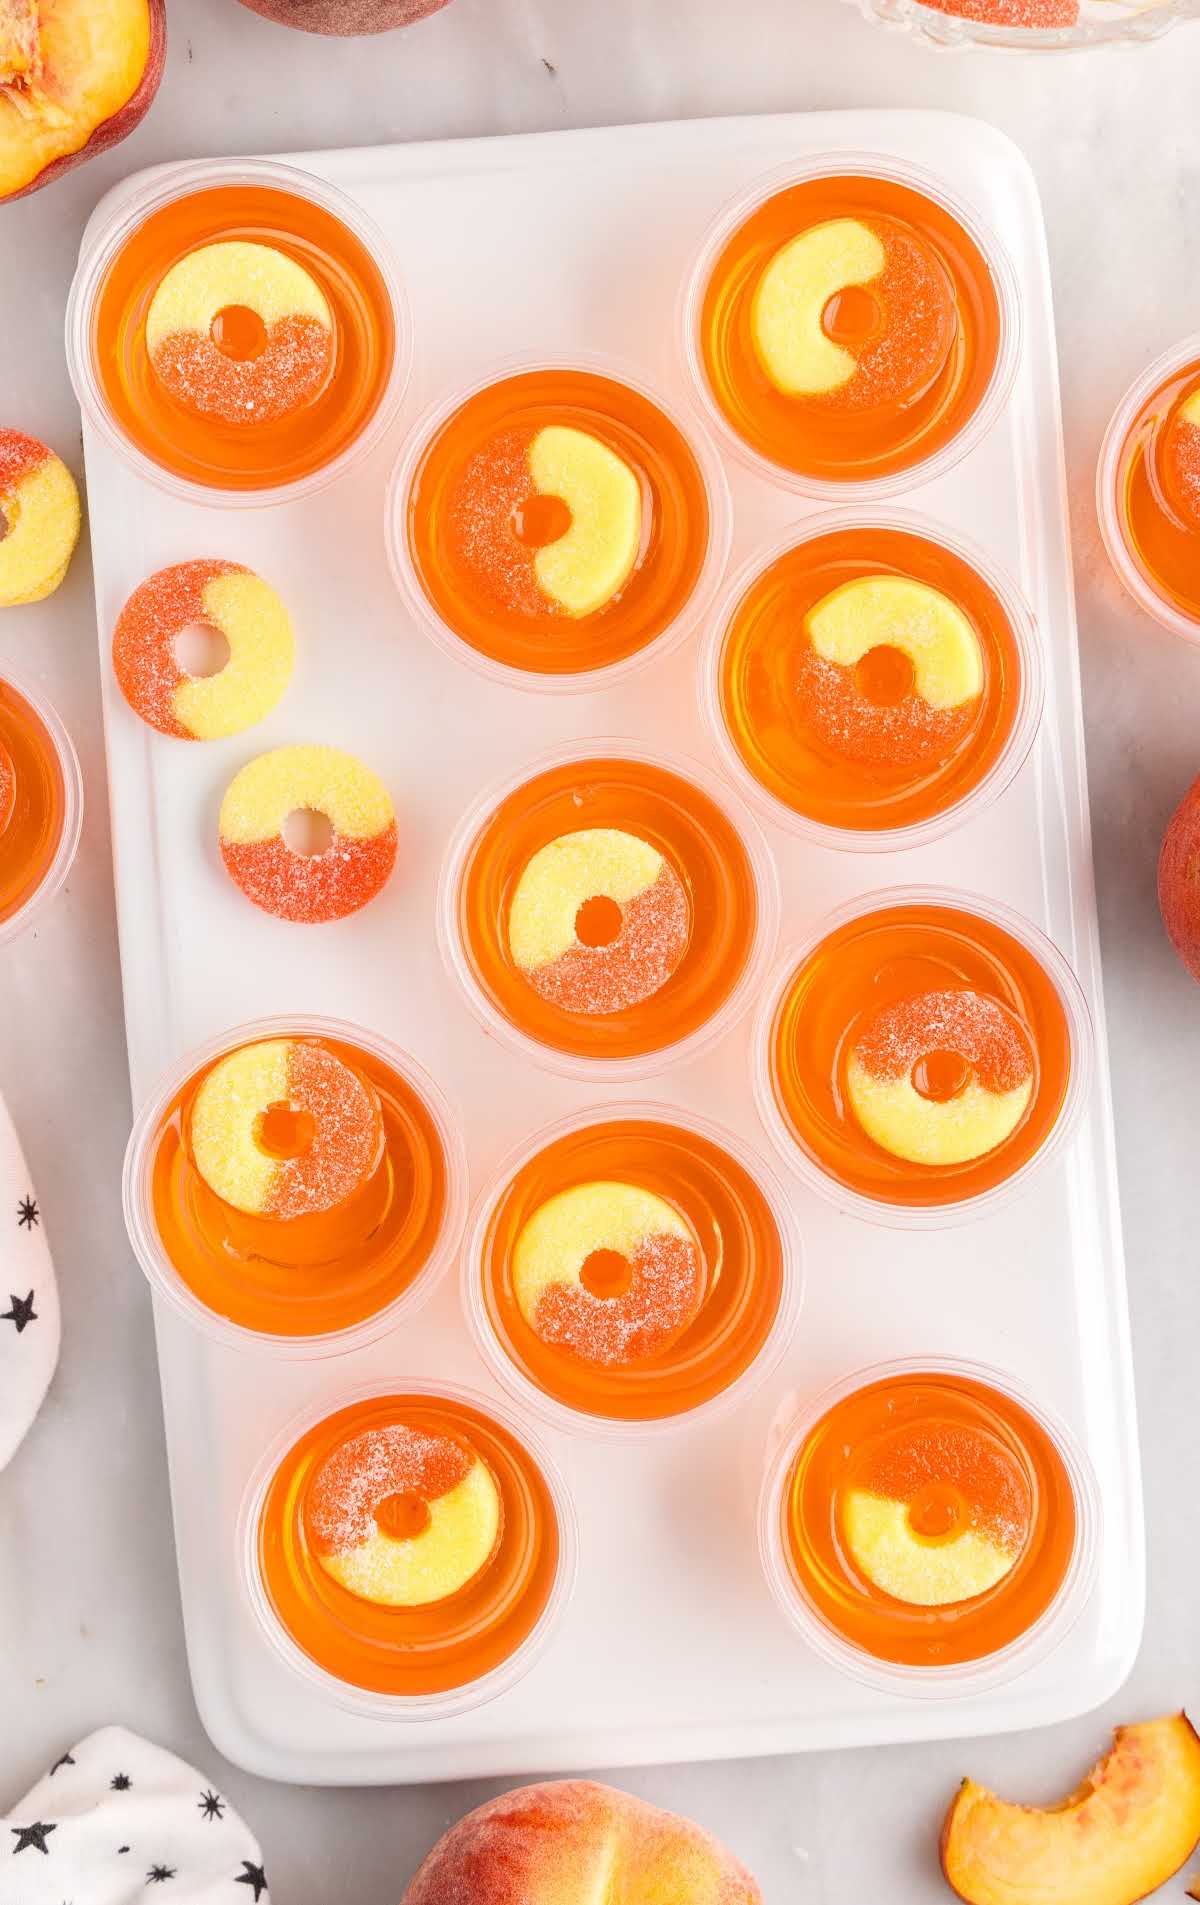 A tray full of oranges on a table